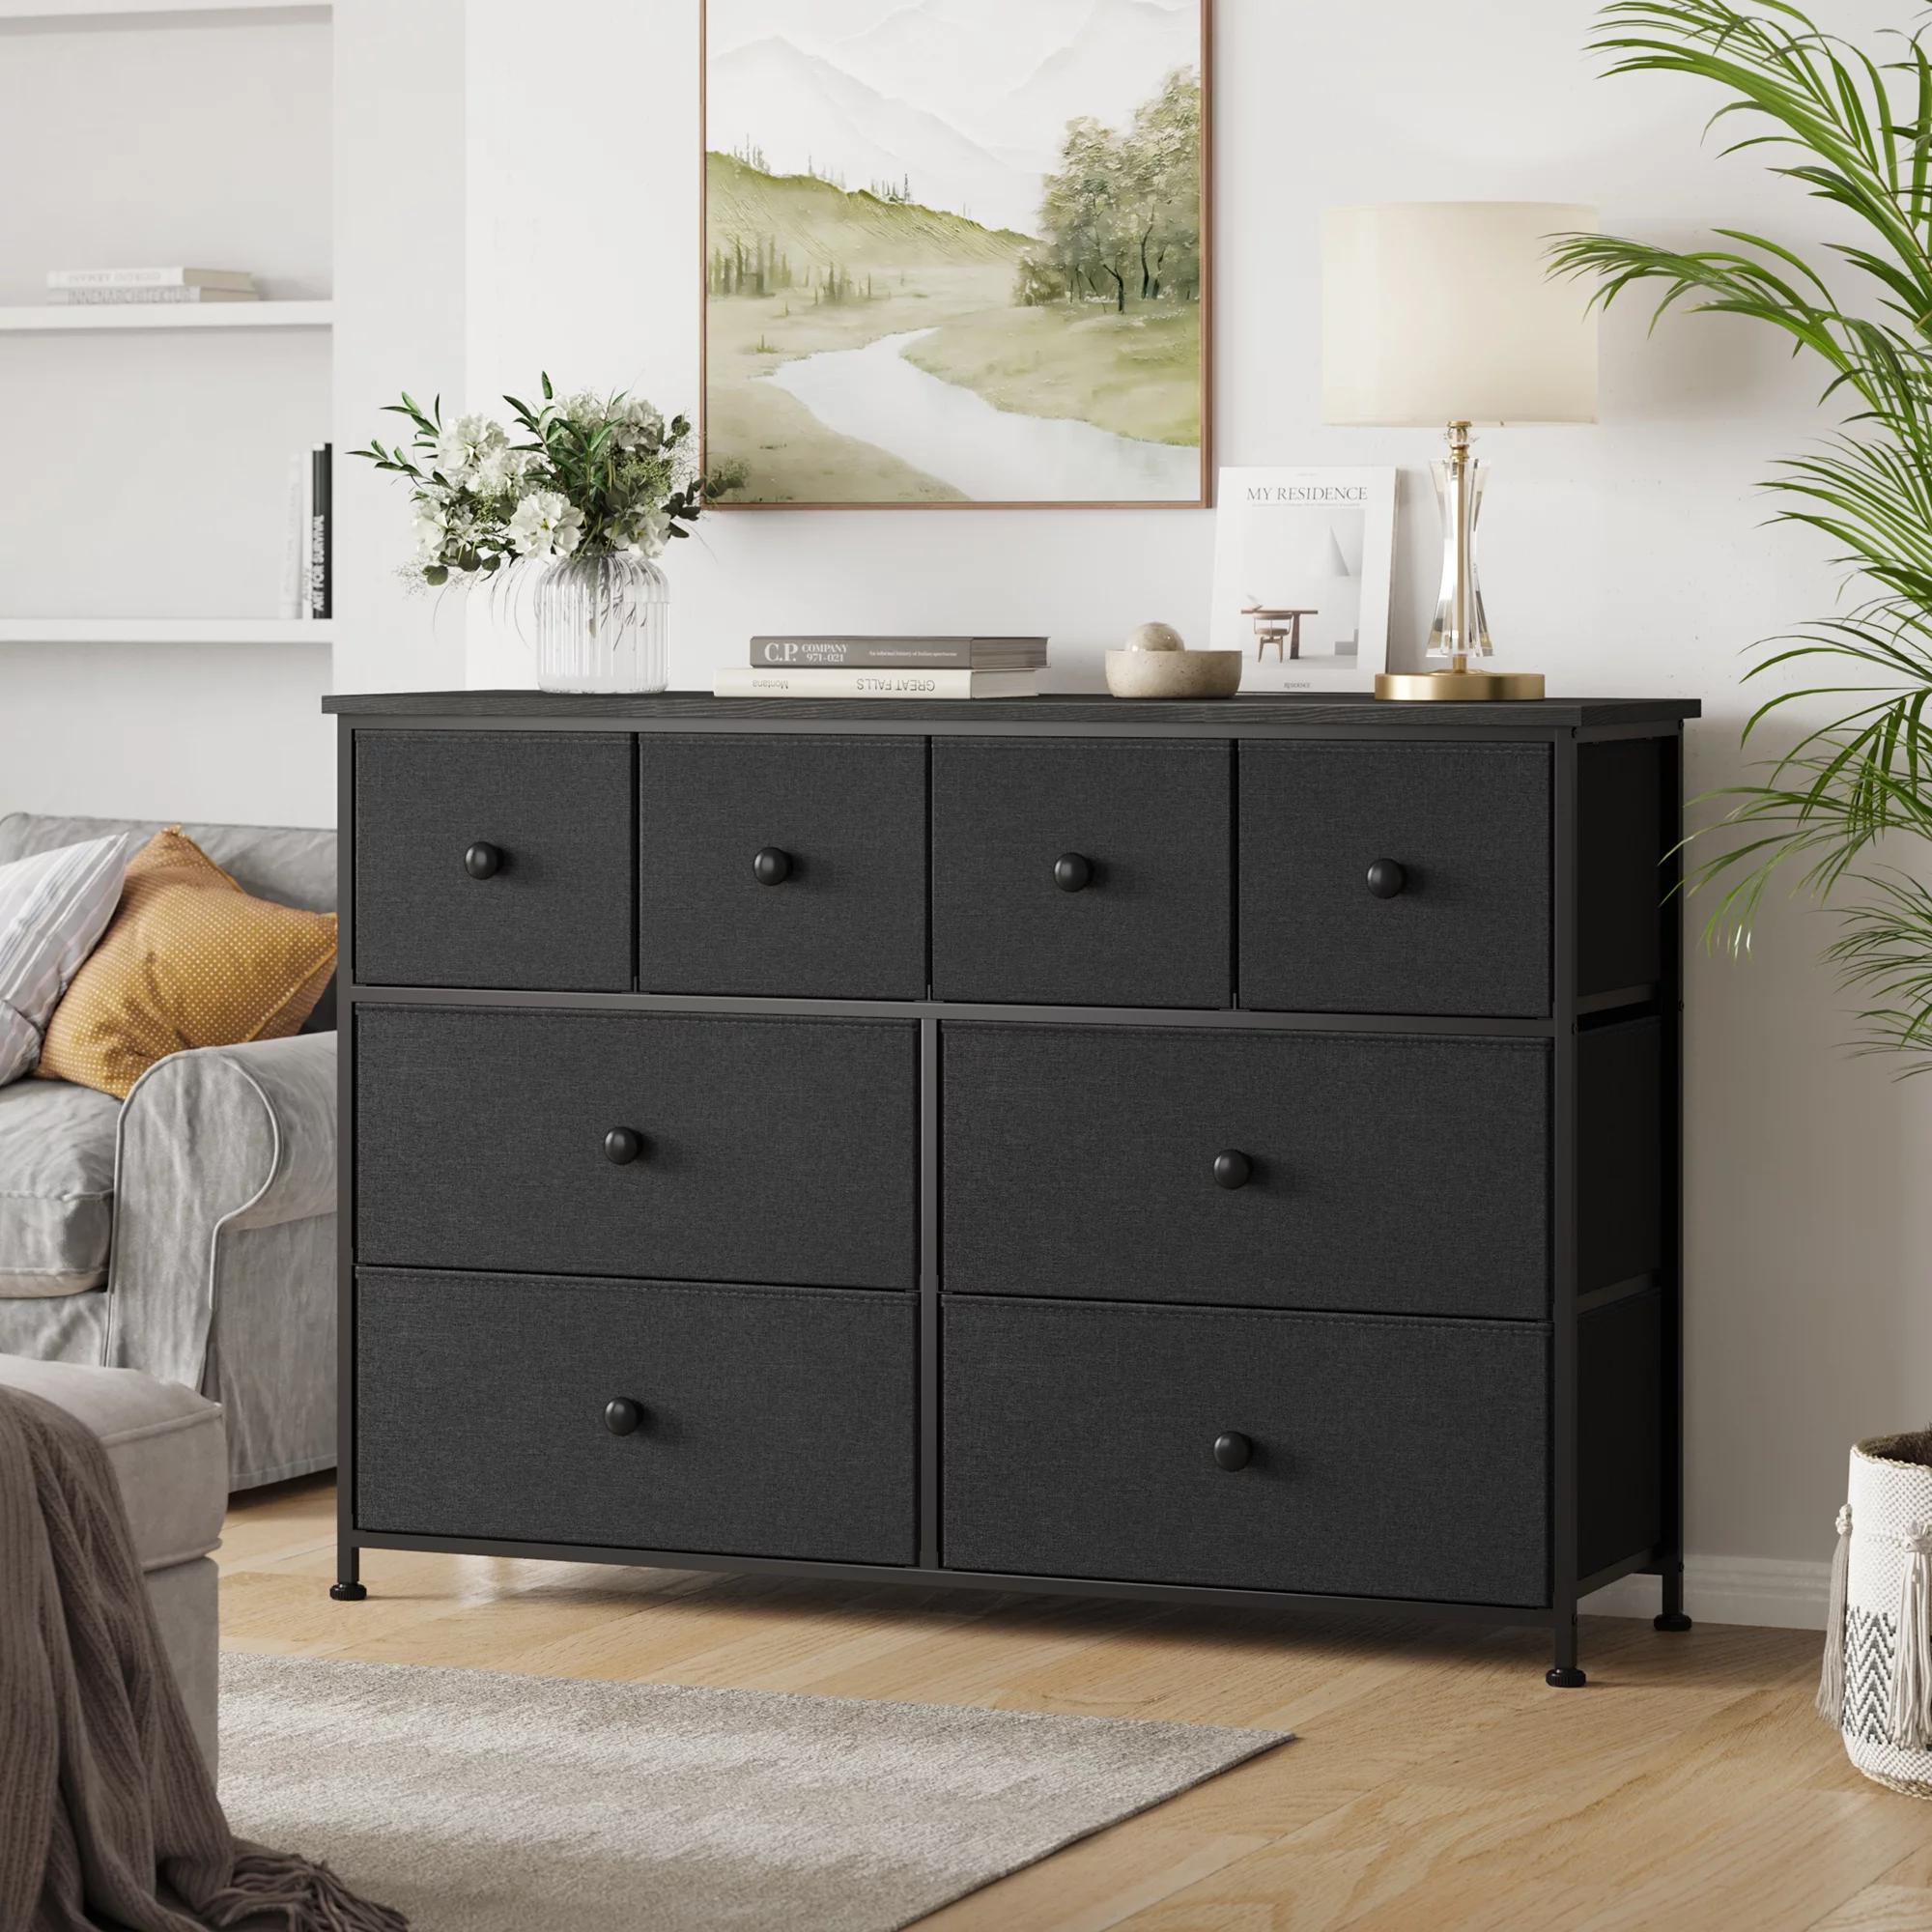 GUNAITO 8 Drawer Dresser, Chest of Drawers for Bedroom, Fabric Drawer for Kids and Adult, Steel Frame and Wooden Top Black Grey